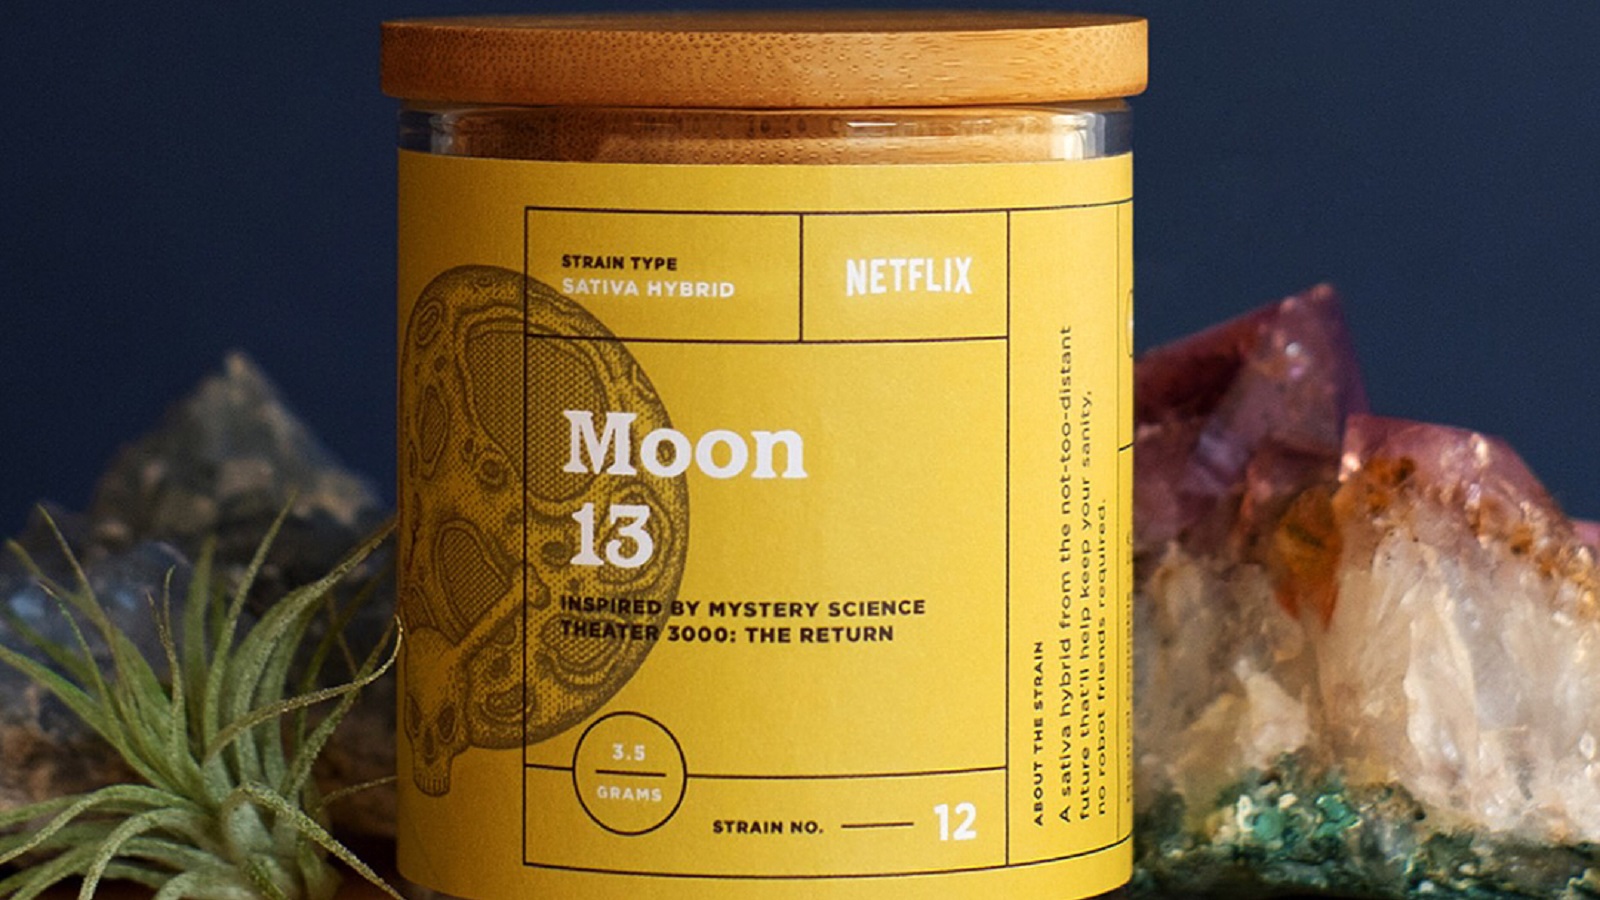 Netflix & Chill Gets New Meaning with Cannabis Strains